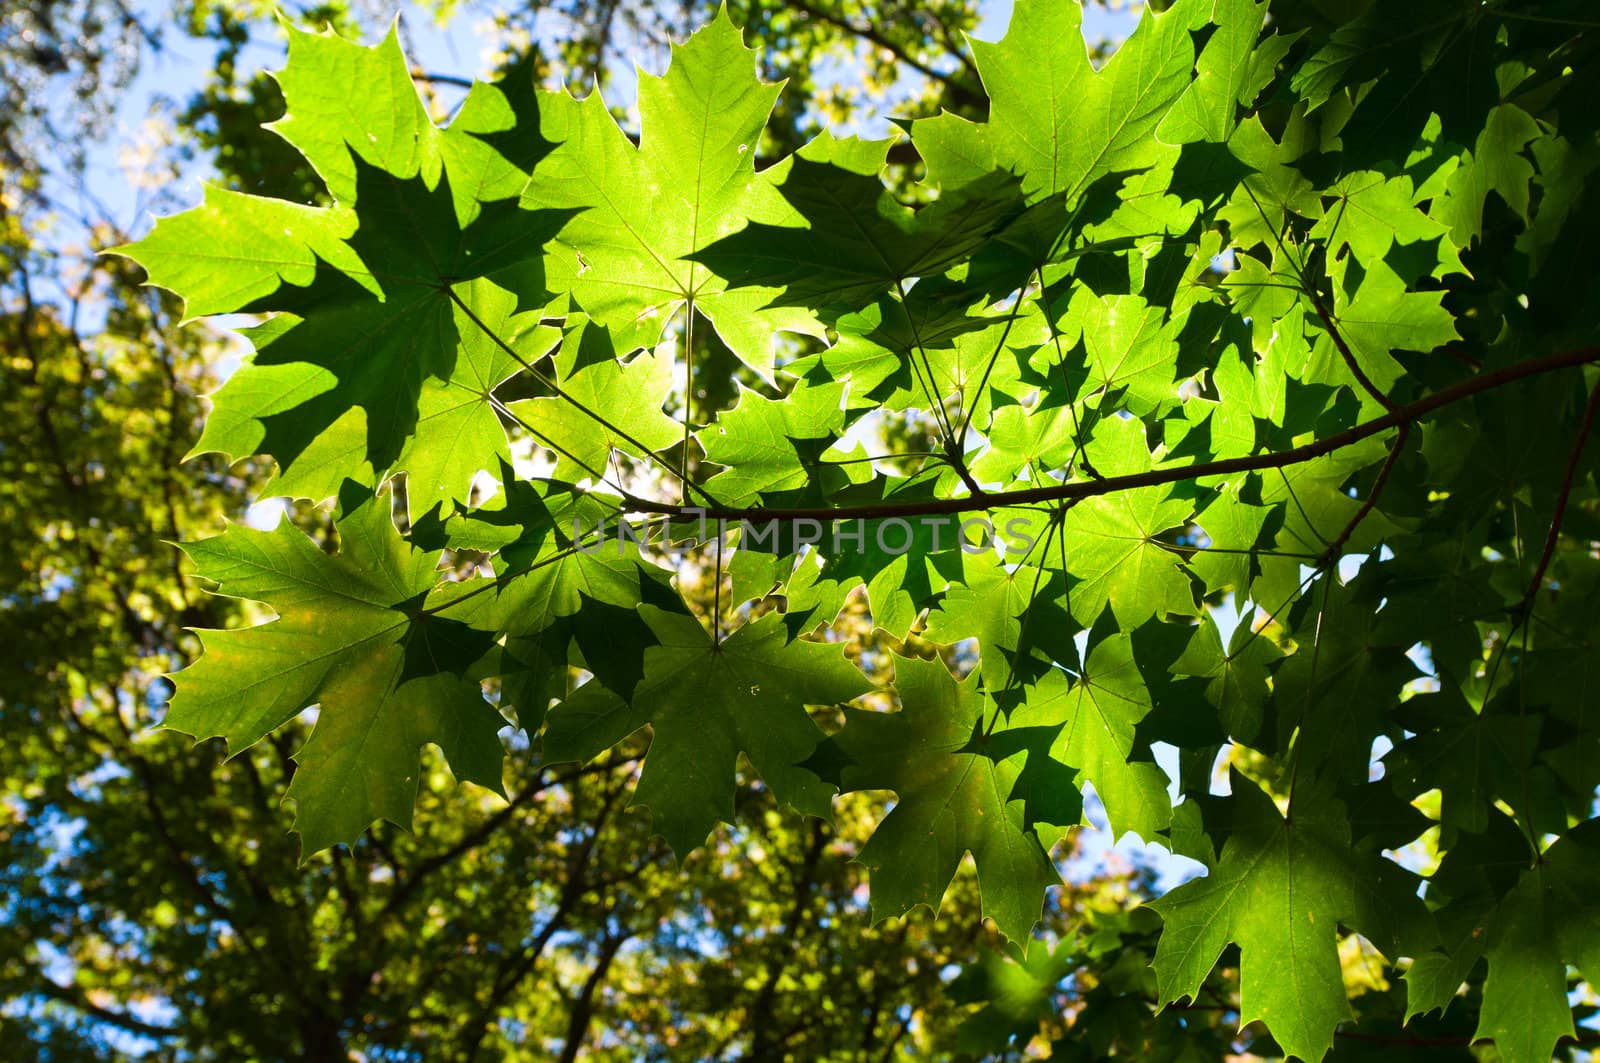 Leaves illuminate in the sunlight bright and strong green